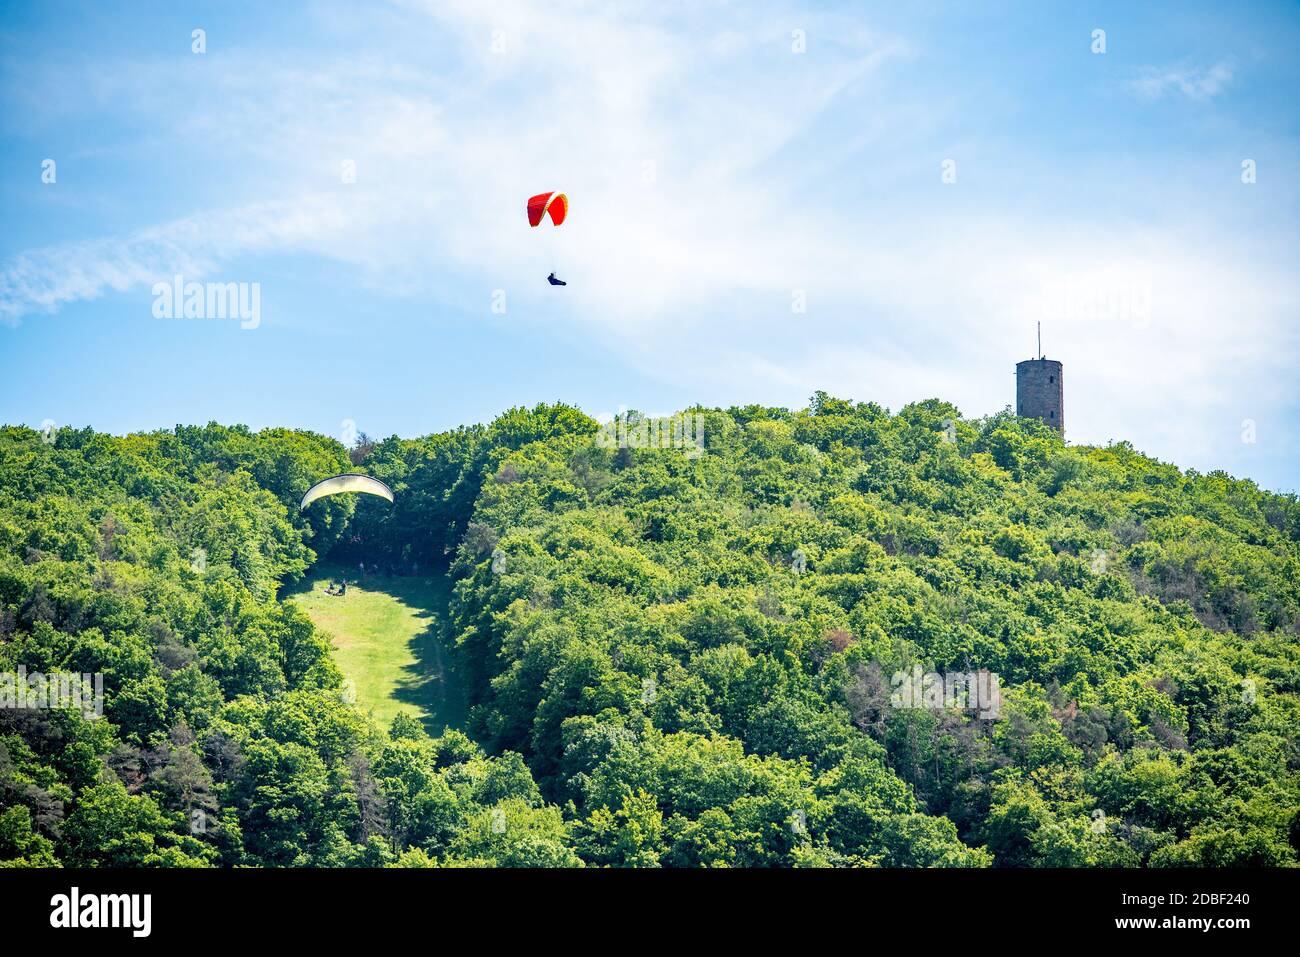 Fly paraglider Stock Photo